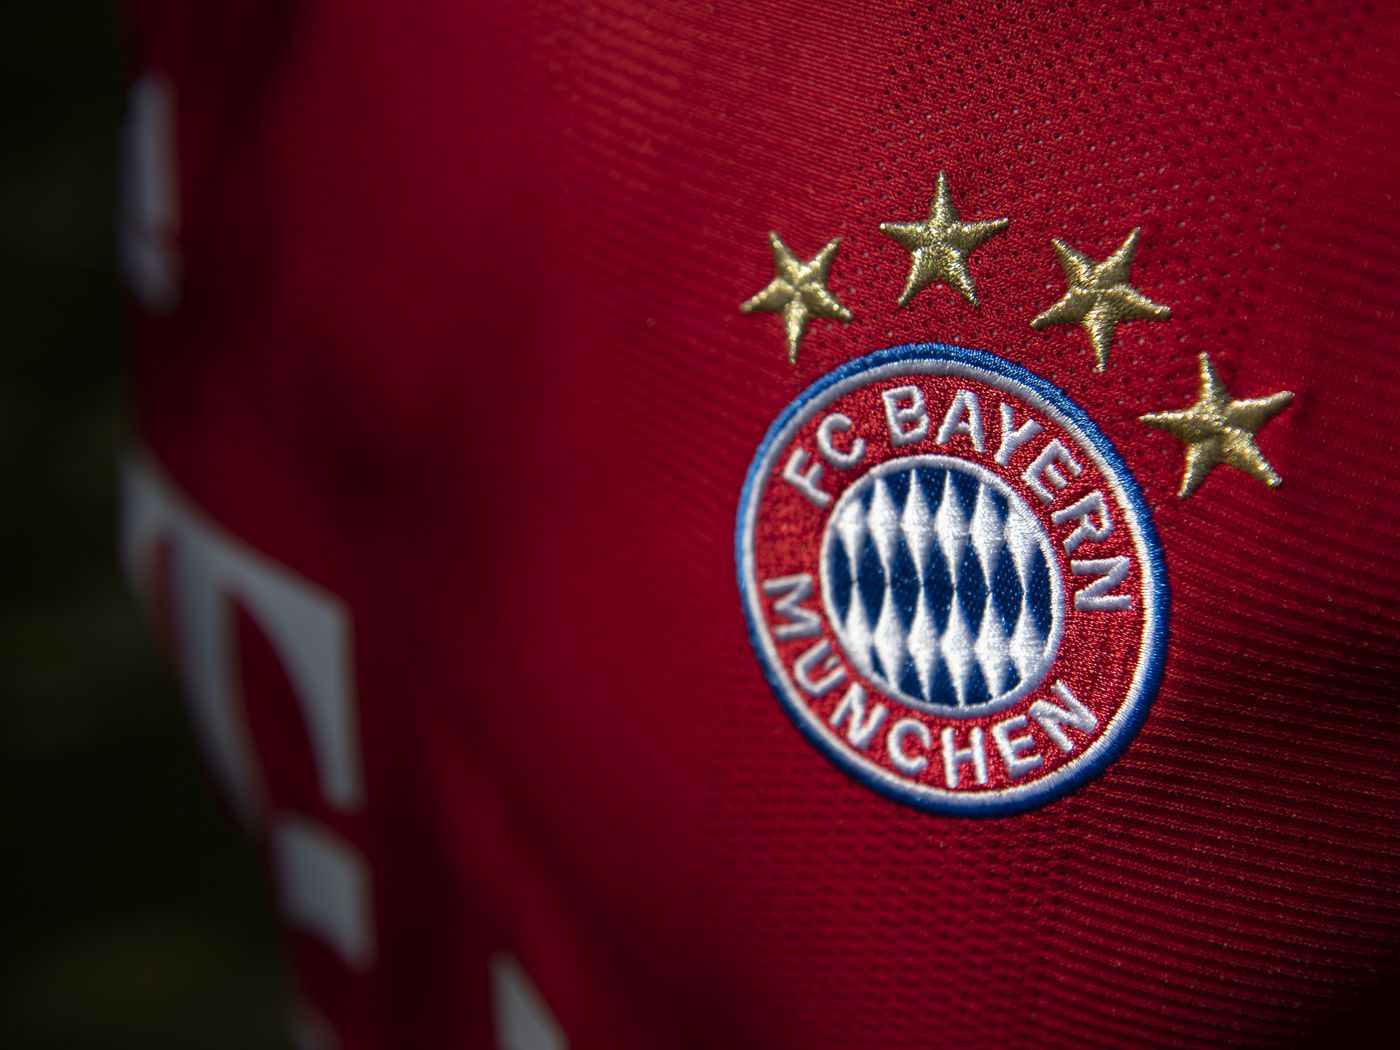 Munich Bayern Schedule 2022 Kit Reveal: Bayern Munich Officially Releases Away Kit For 2021/2022 -  Bavarian Football Works